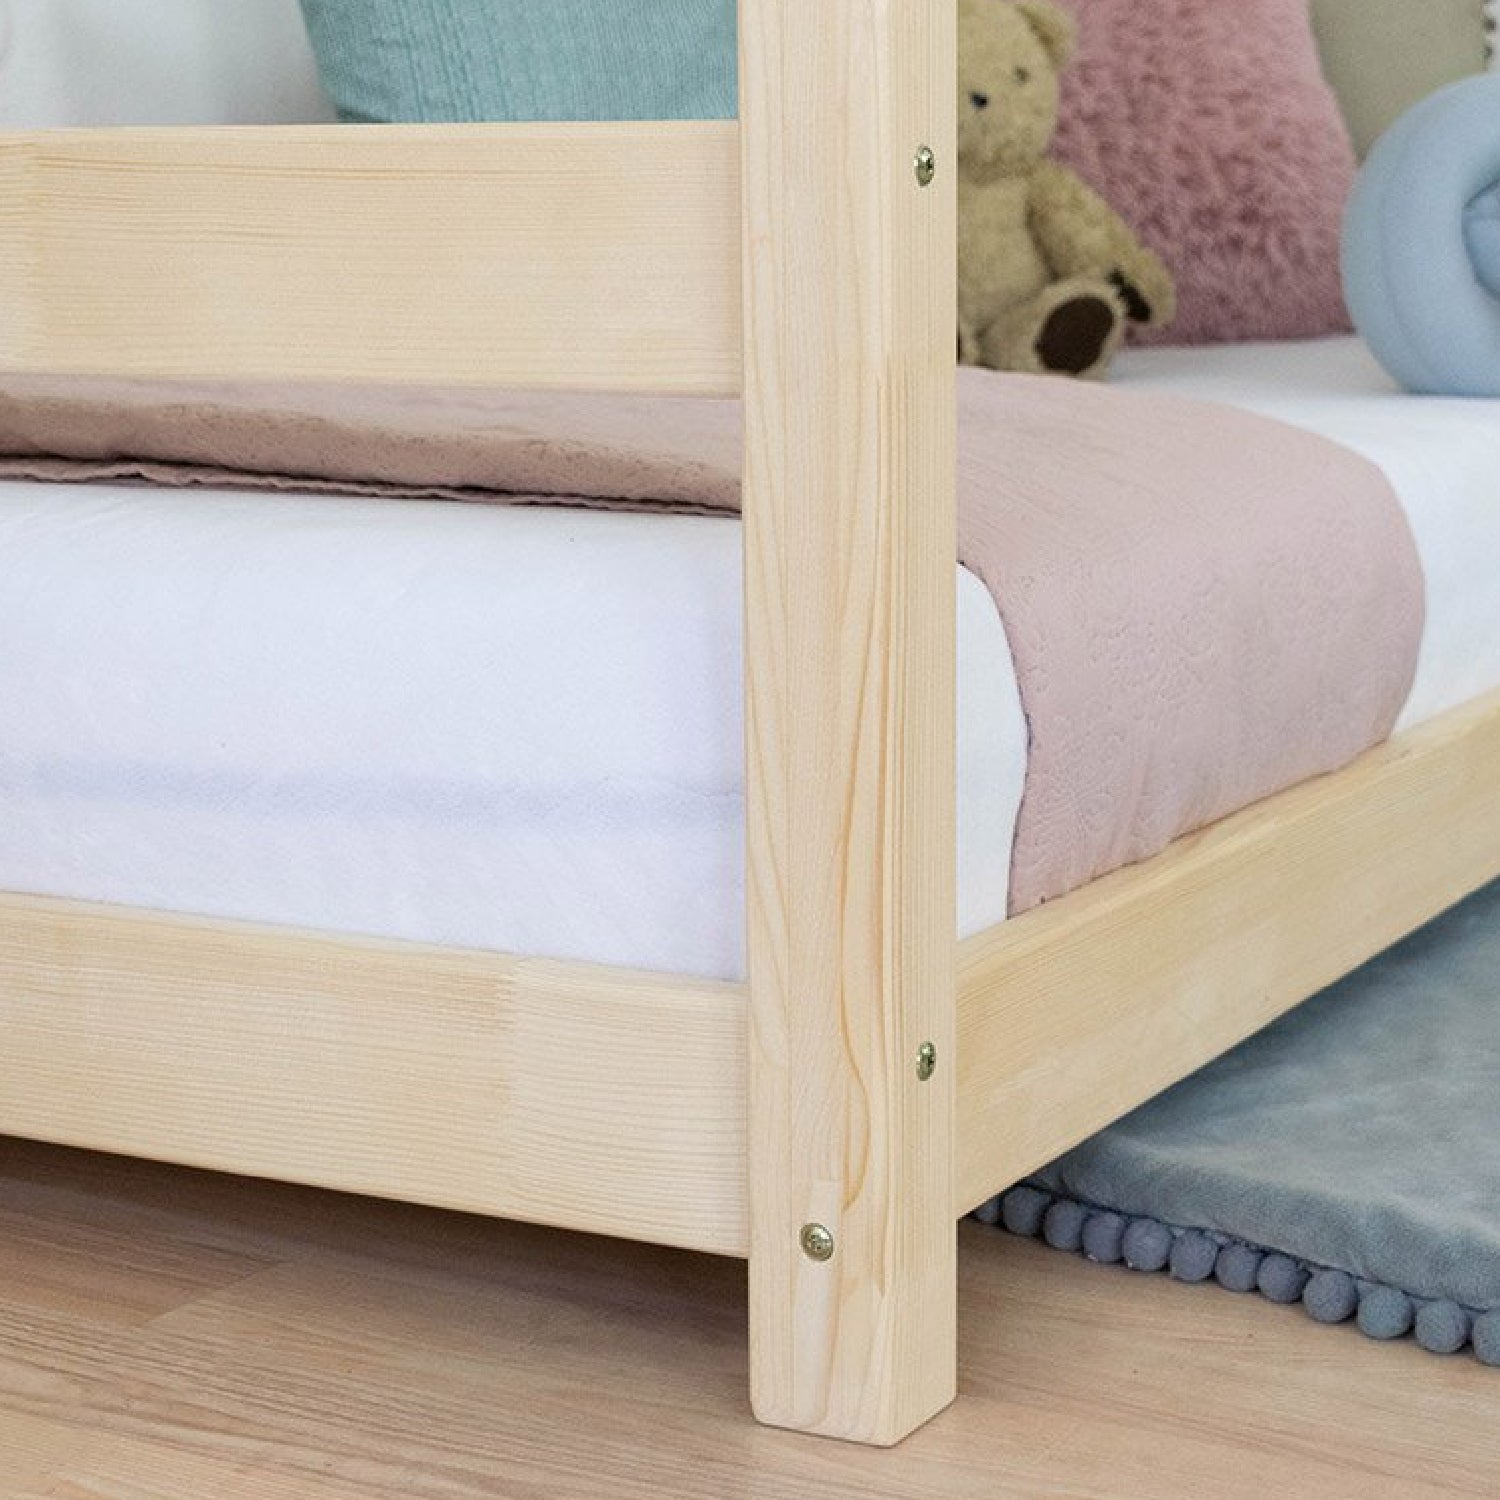 Tery Children's House Bed with Firm Guard